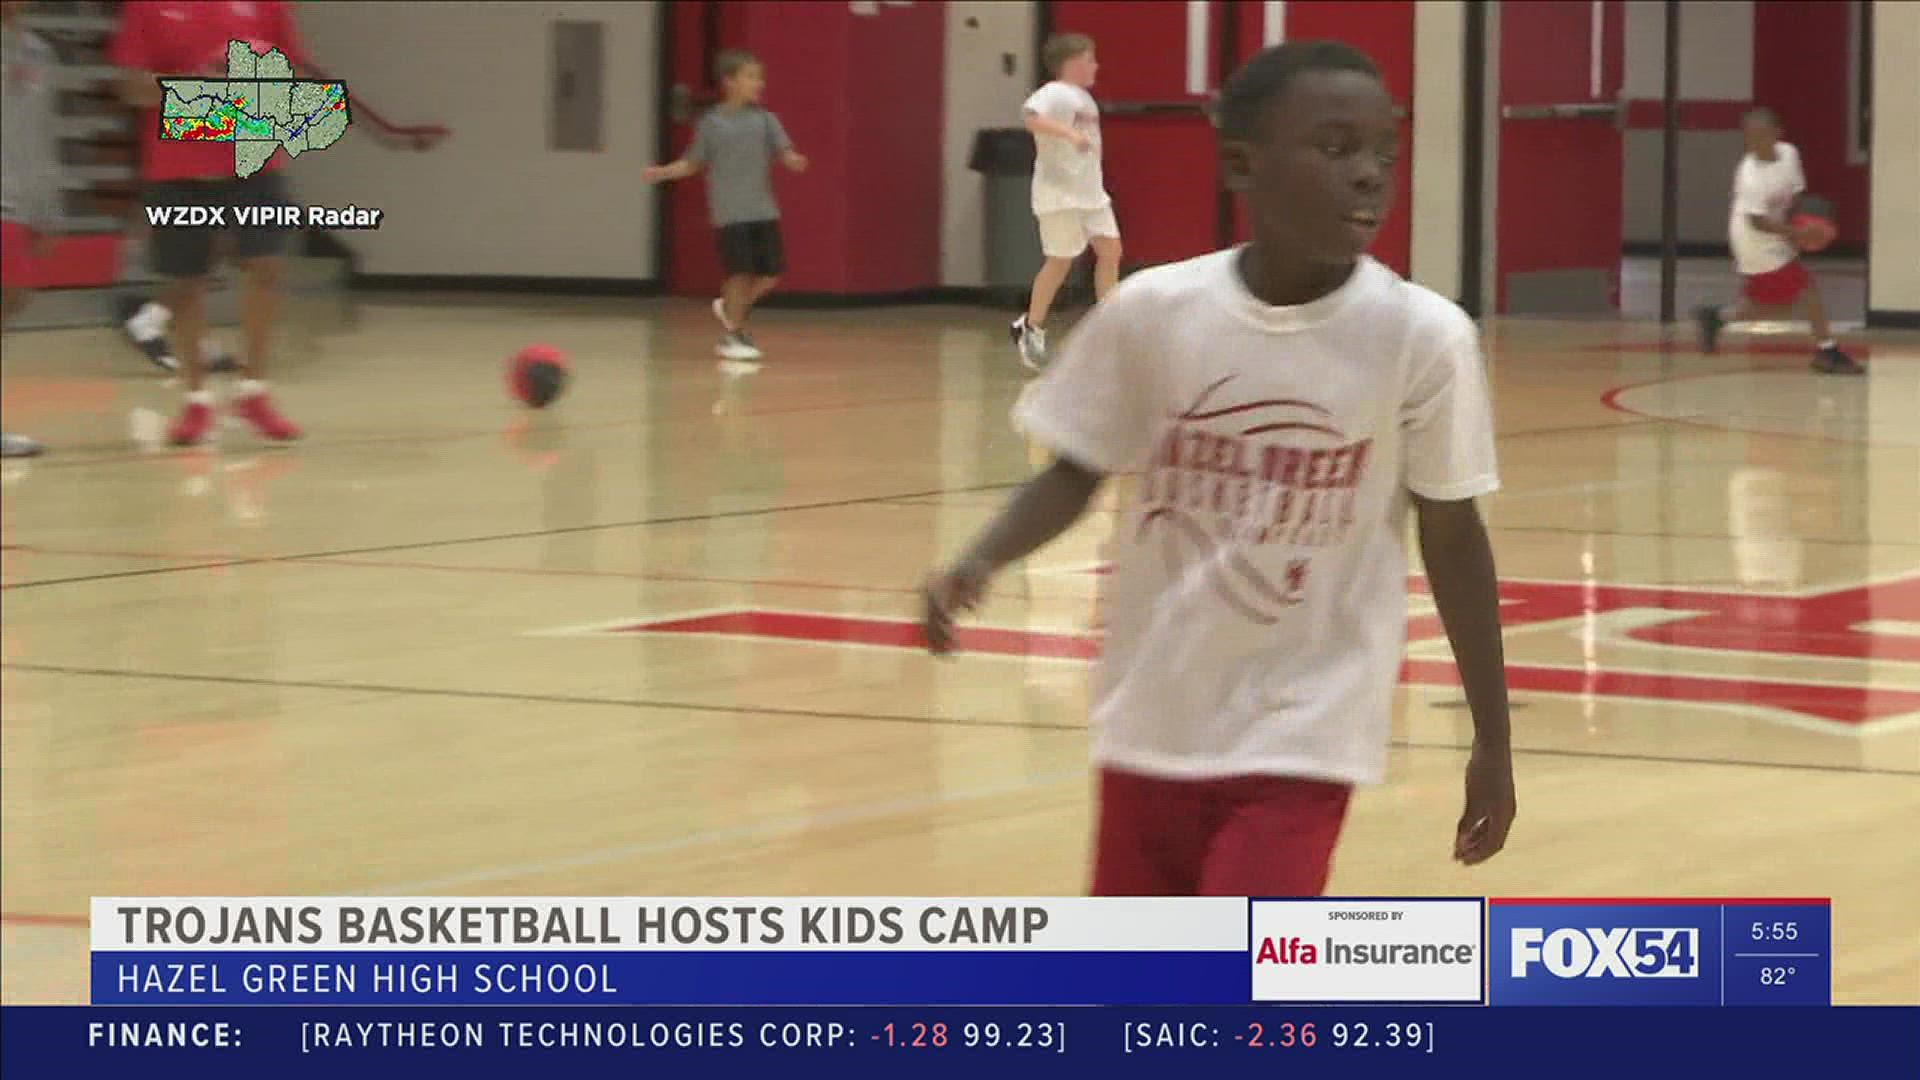 Jeremy Crutcher and the Hazel Green Trojans hosted a boys youth basketball camp this week.